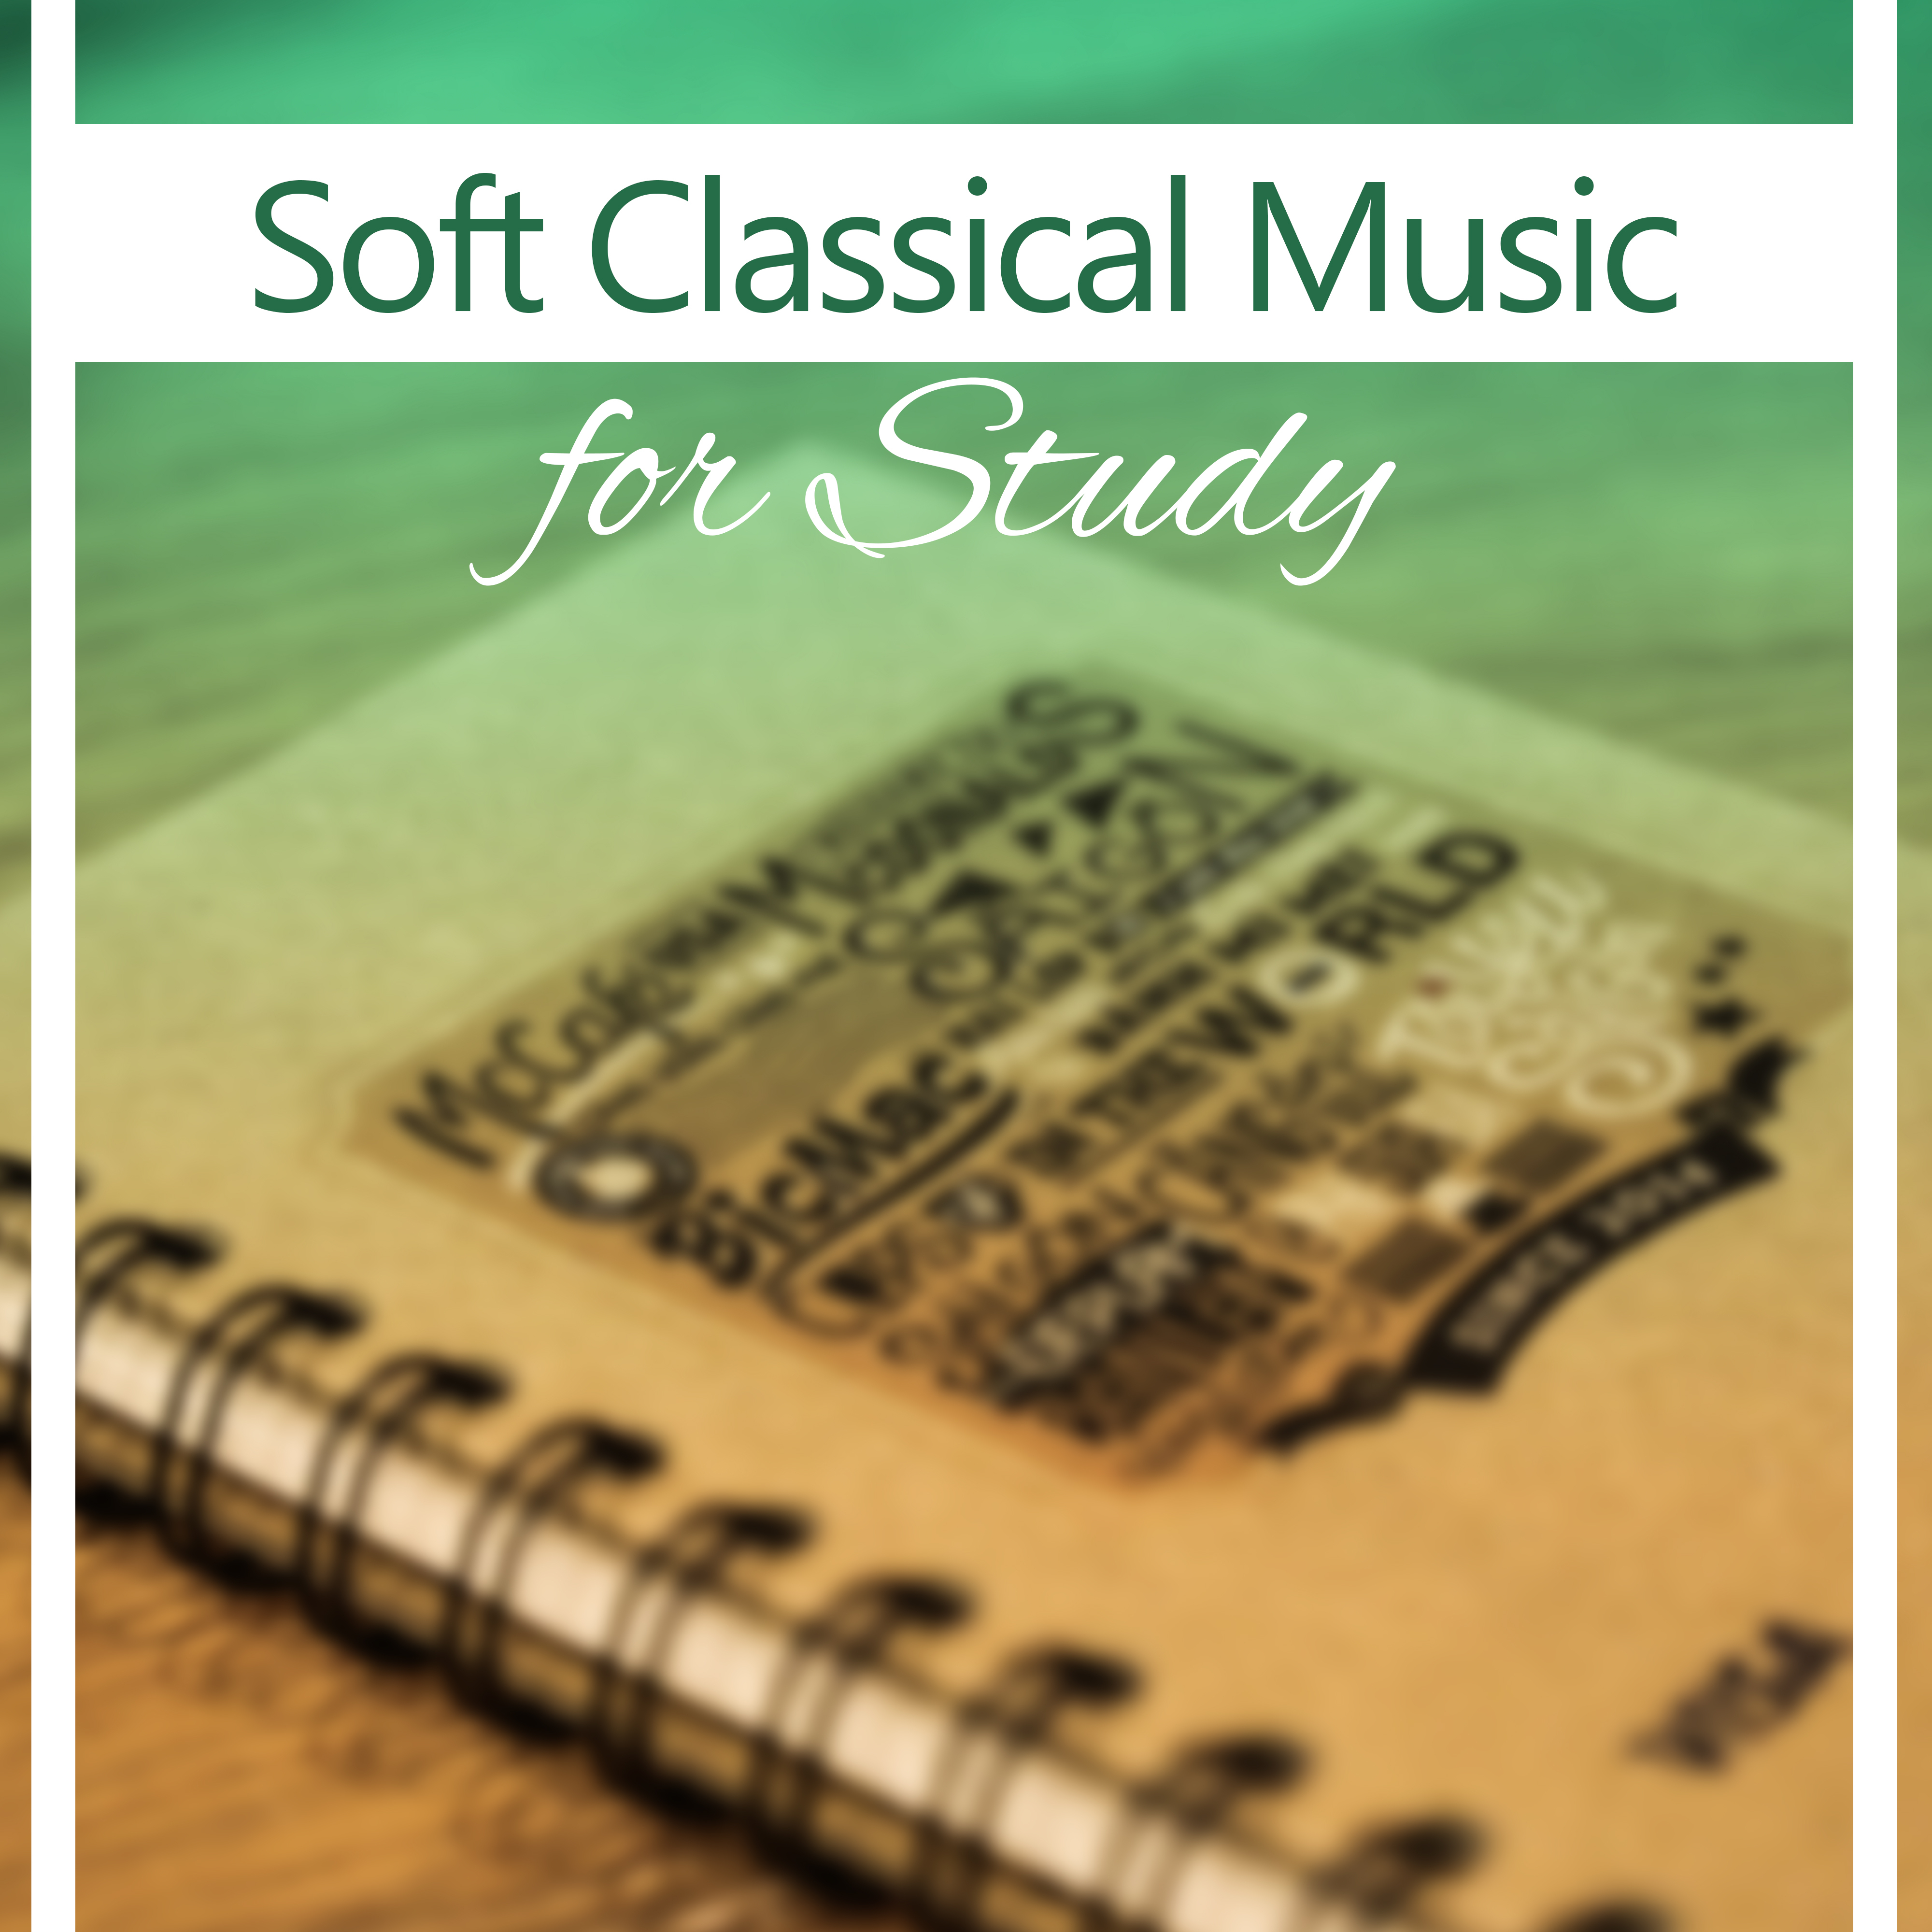 Soft Classical Music for Study  Easy Work, Train Your Mind, Brain Power, Stress Free, Music Helps Pass Exam